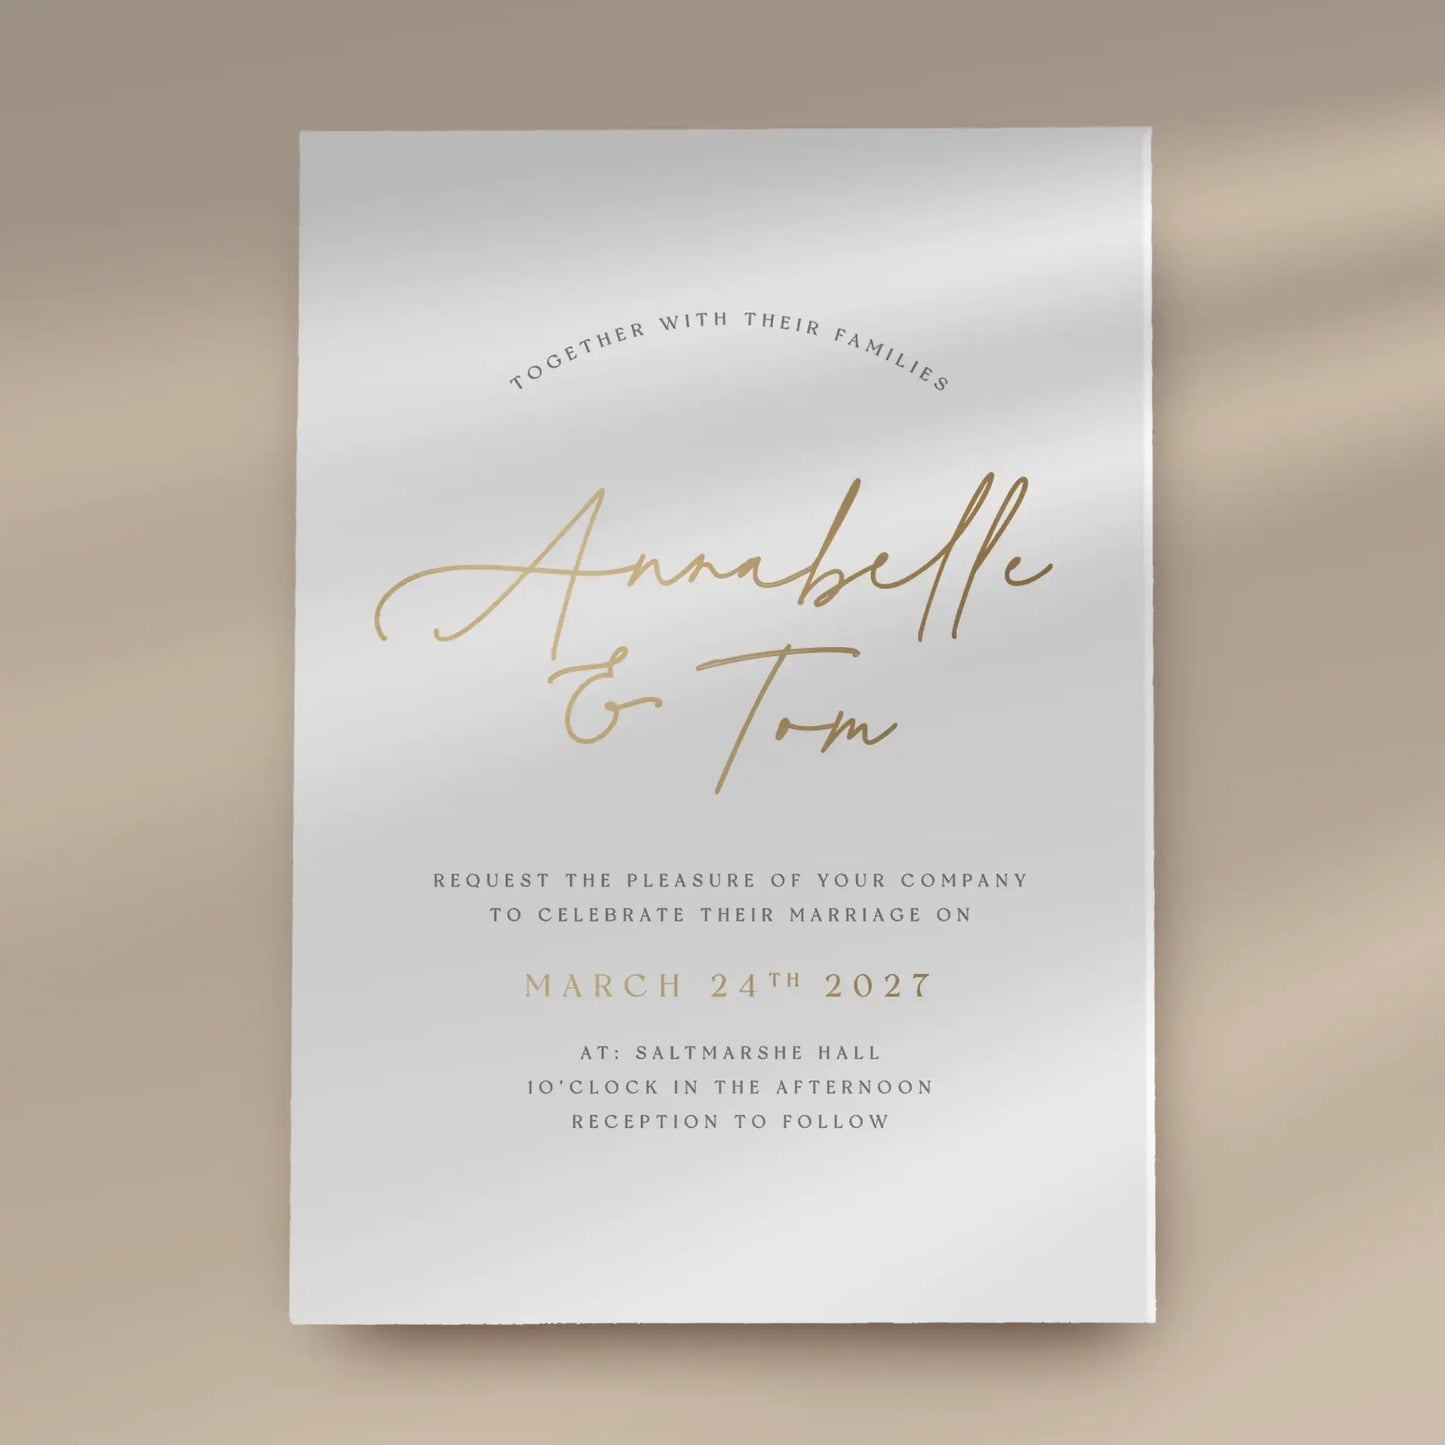 Day Invitation Sample  Ivy and Gold Wedding Stationery Annabelle  